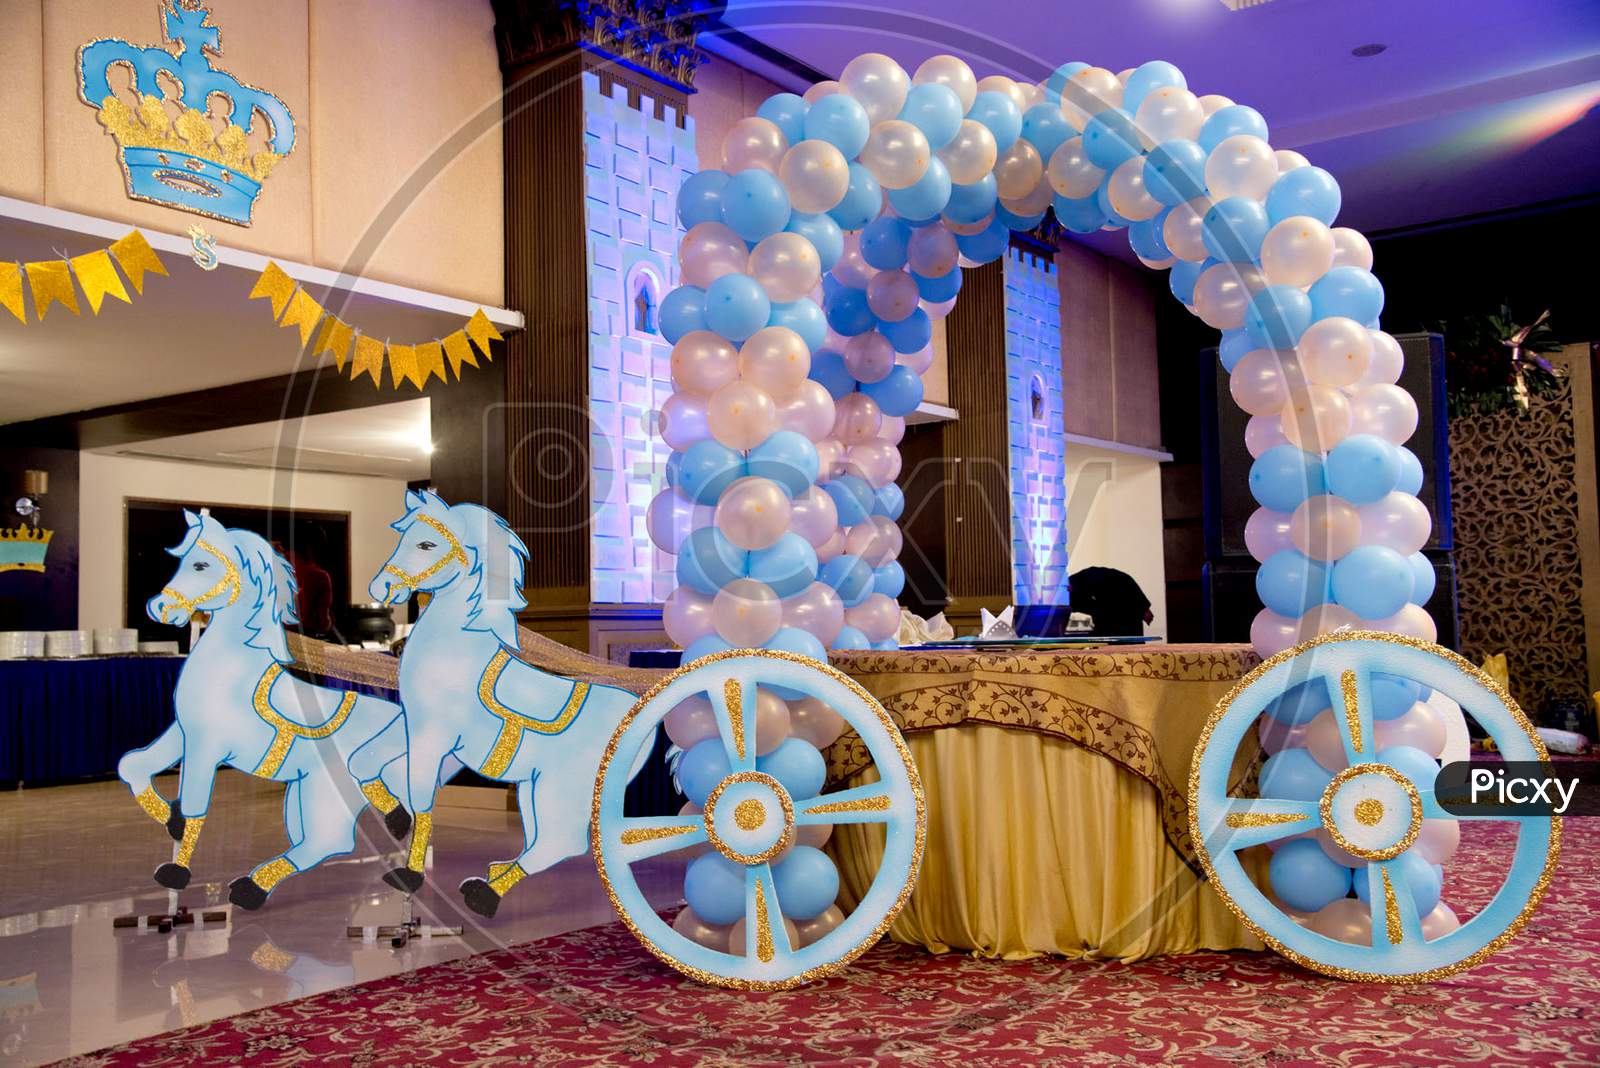 royal horse cart decoration in a birthday party with cake and balloons.